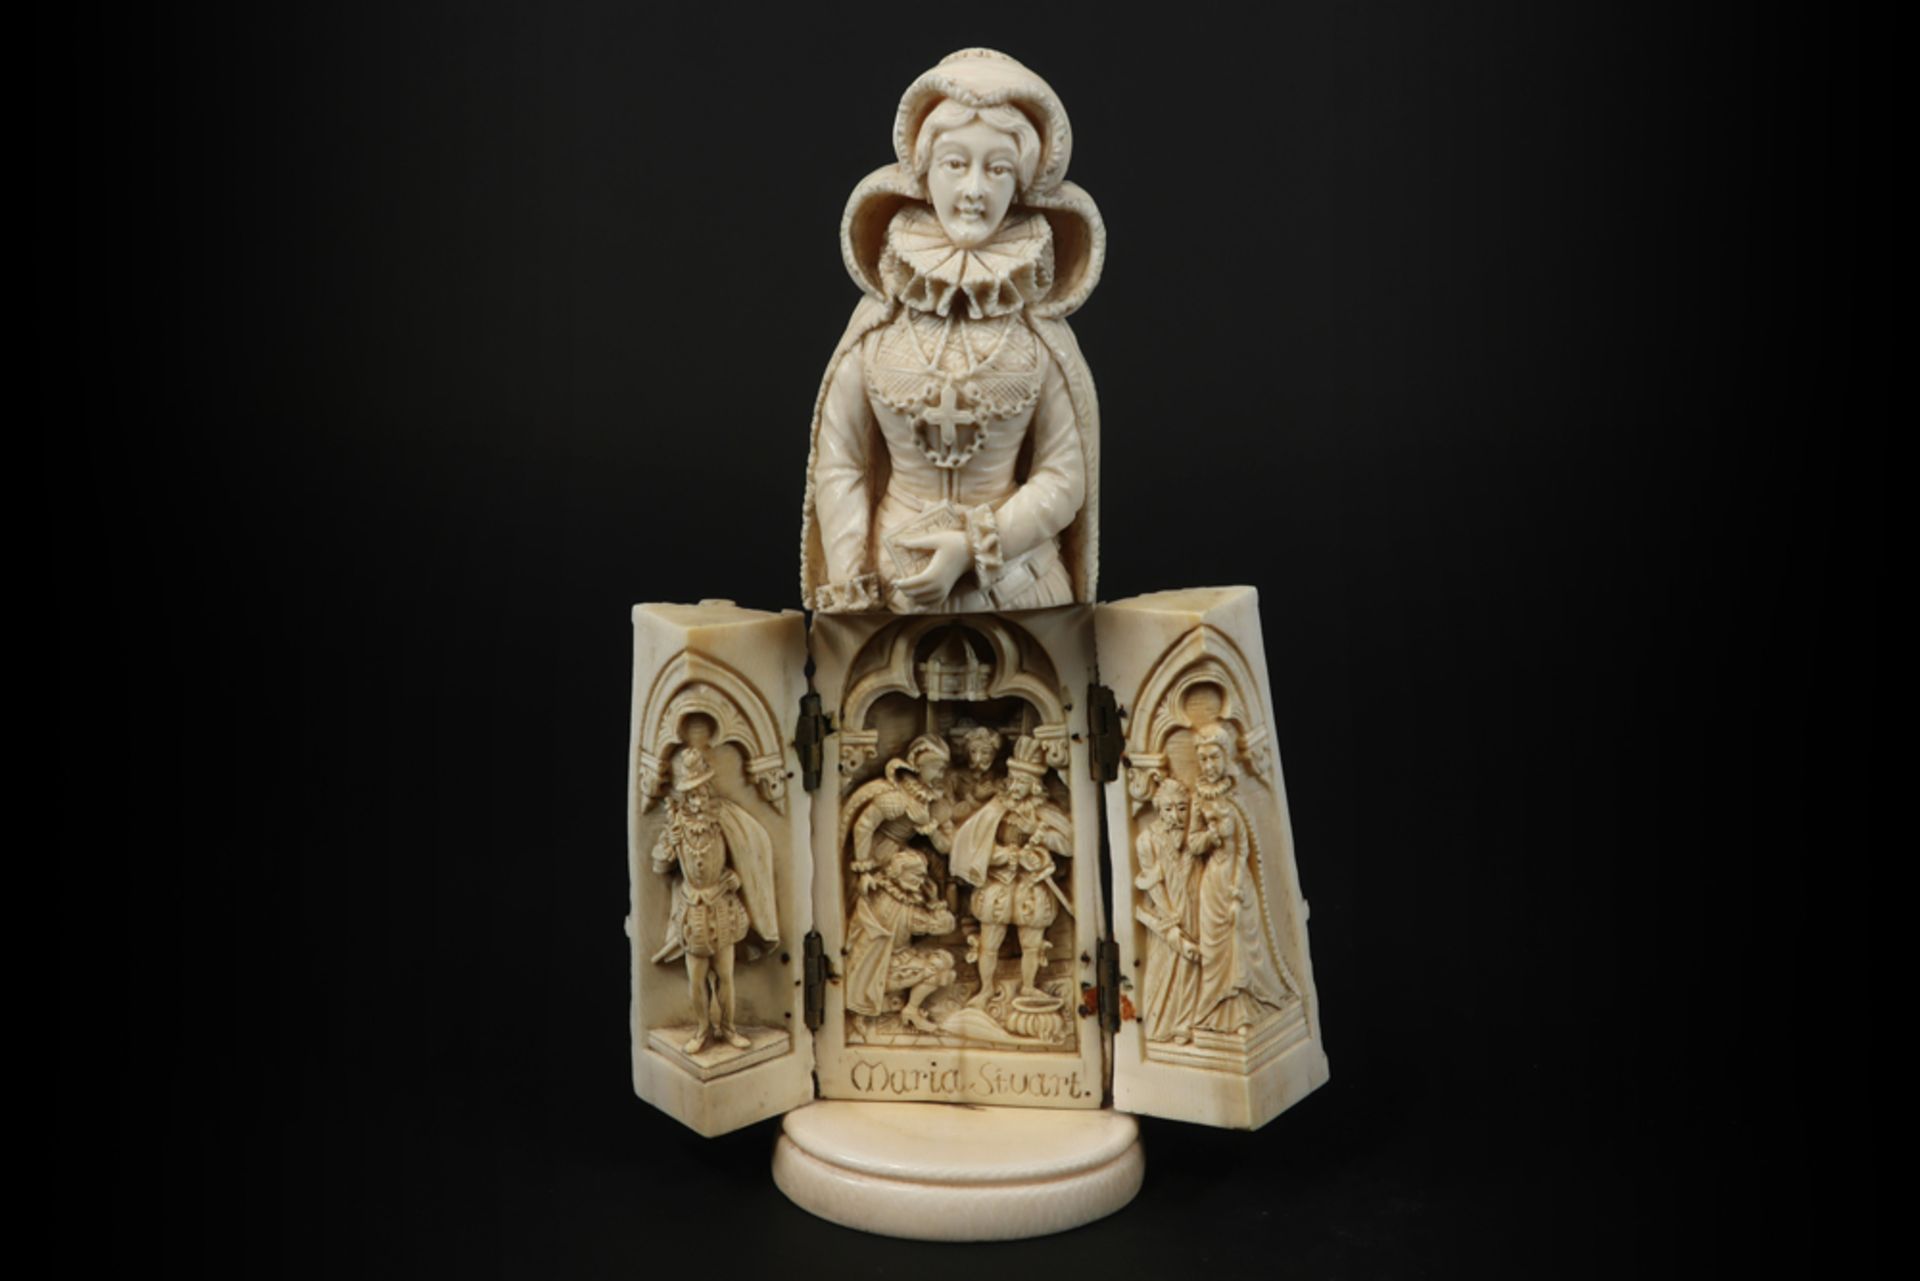 19th Cent European, presumably German, sculpture in ivory depicting Mary Stuart (queen of Scots) , - Image 6 of 8